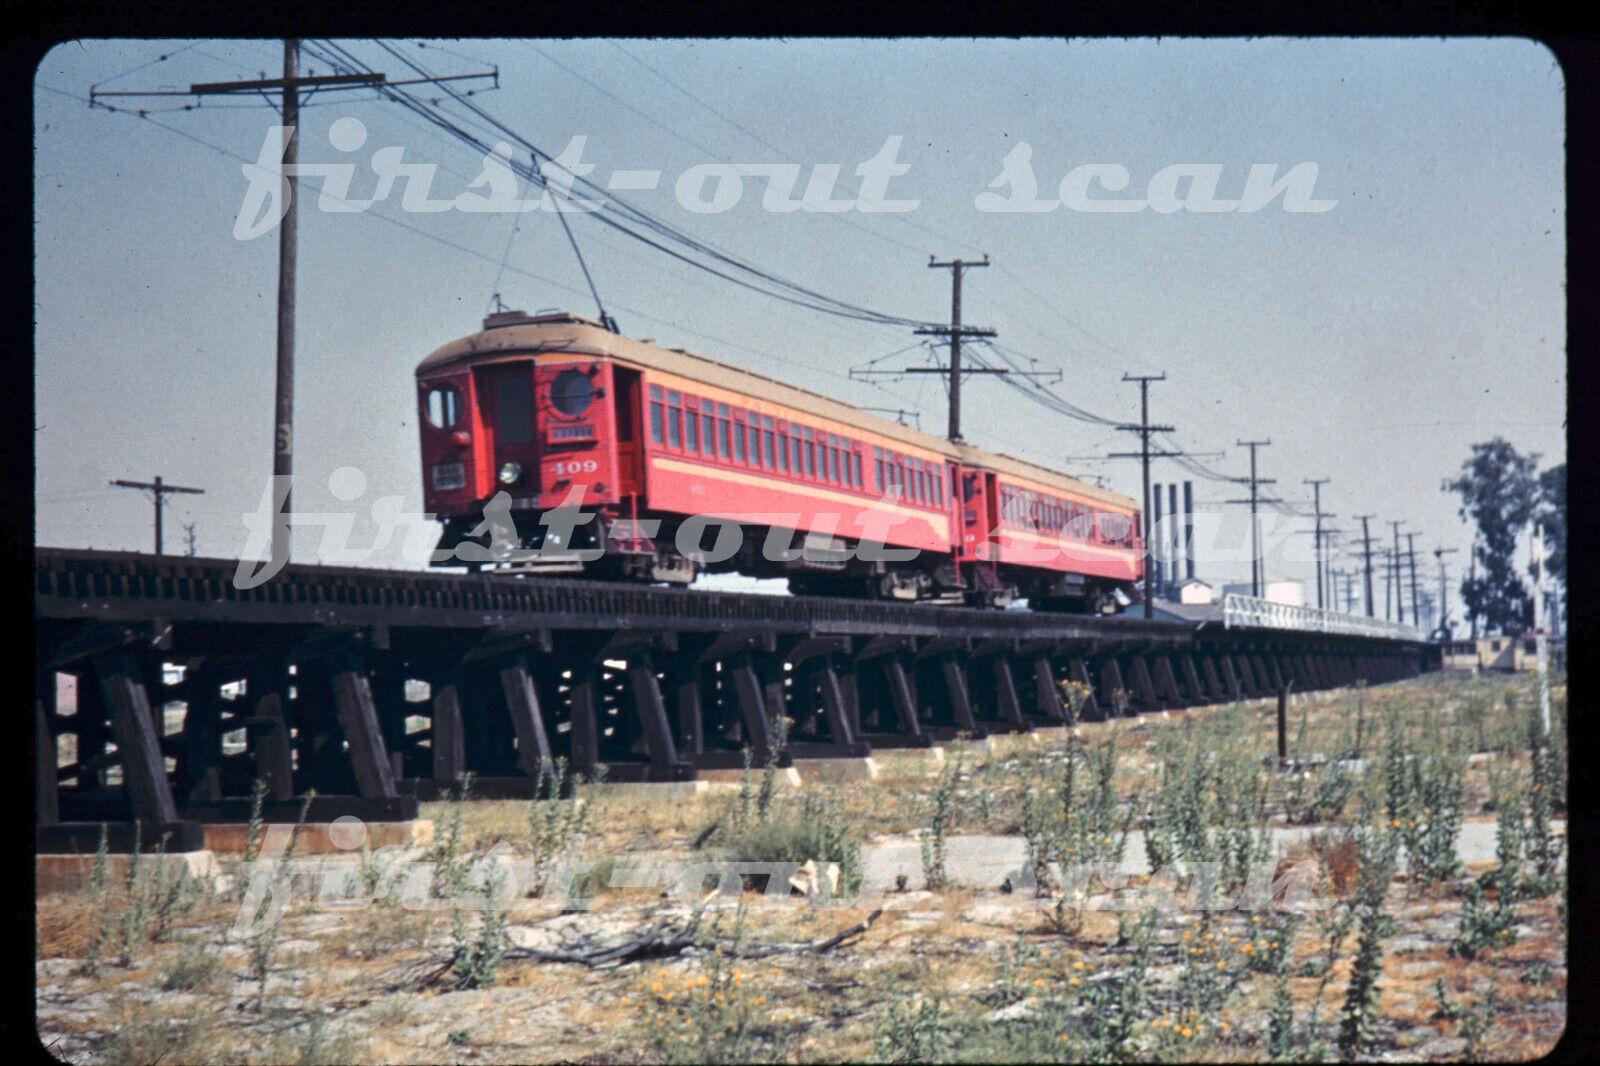 R DUPLICATE SLIDE - Pacific Electric PE 409 Trolley Electric Action on Bridge